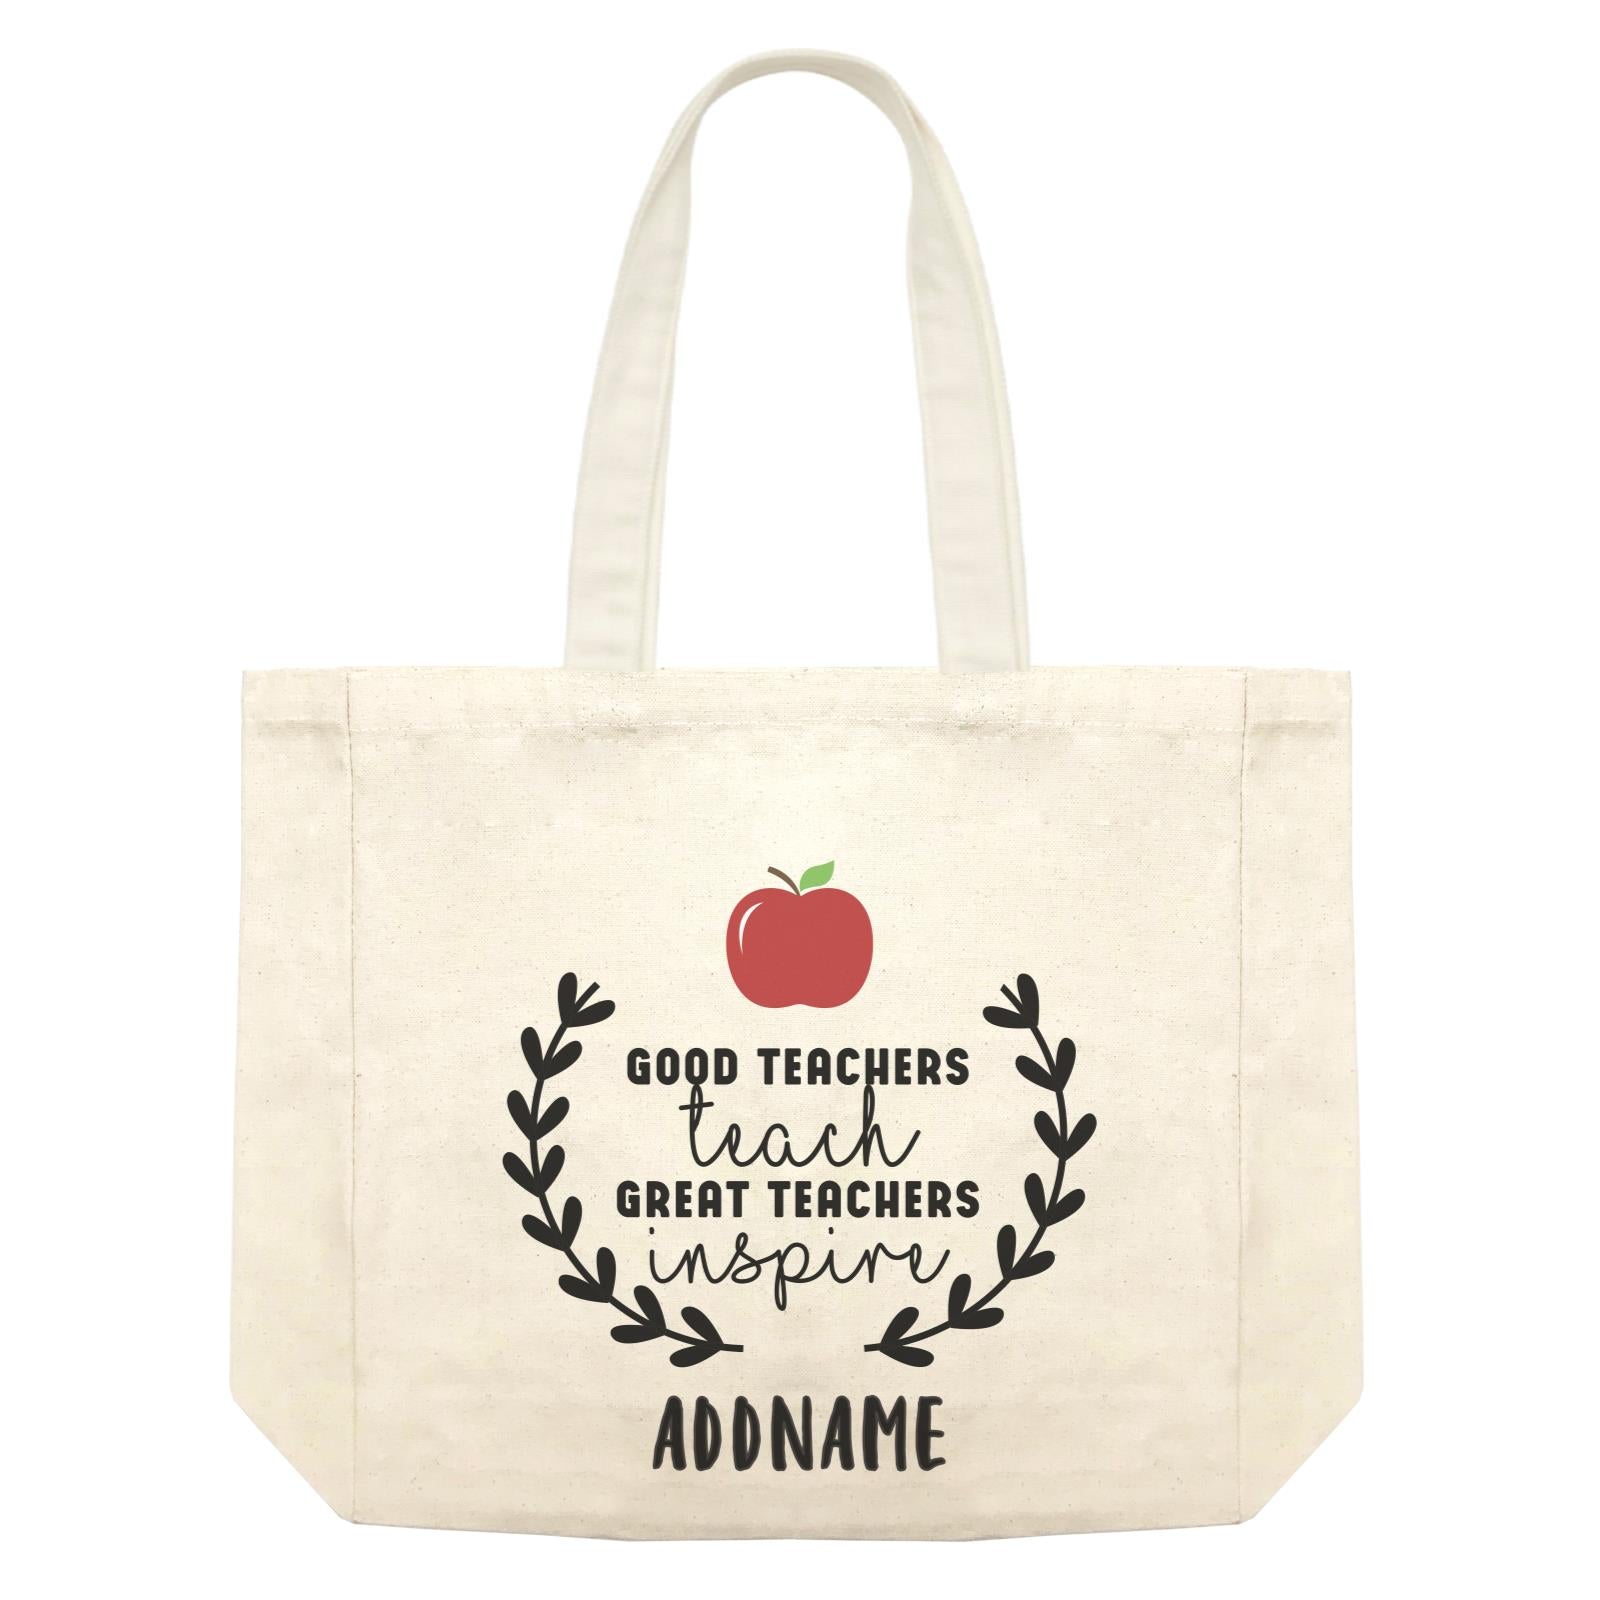 Great Teachers Good Teachers Teach Great Teachers Inspire Addname Shopping Bag